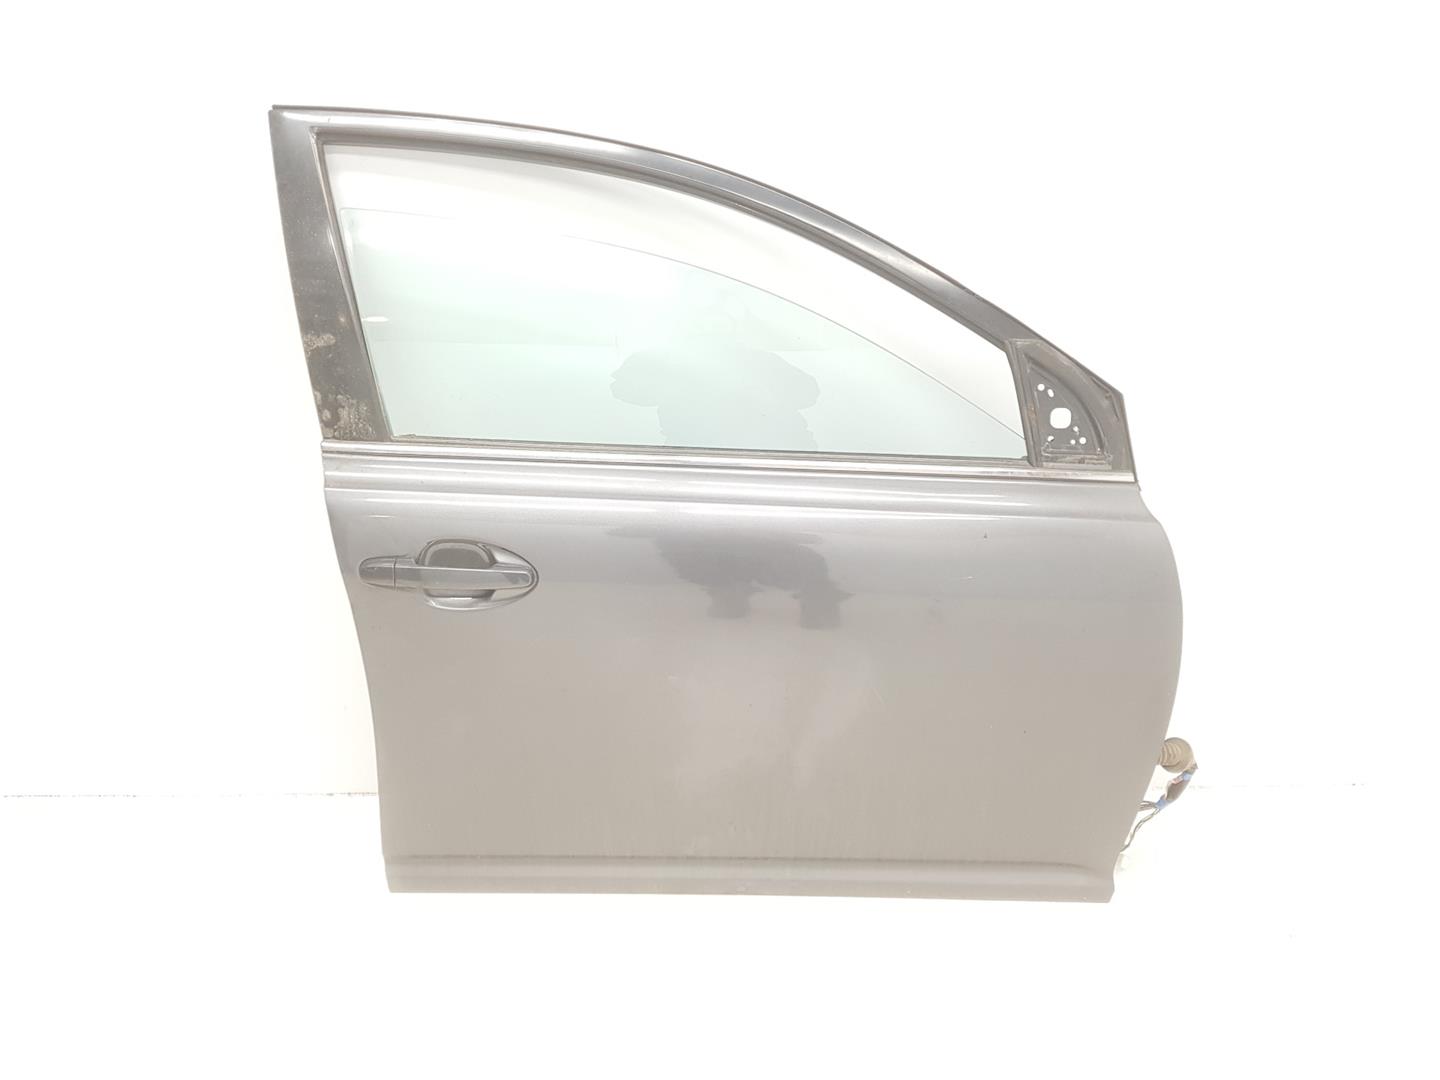 TOYOTA Avensis 2 generation (2002-2009) Front Right Door 6700105050, 6700105050, COLORGRISOSCURO1G3 19924272